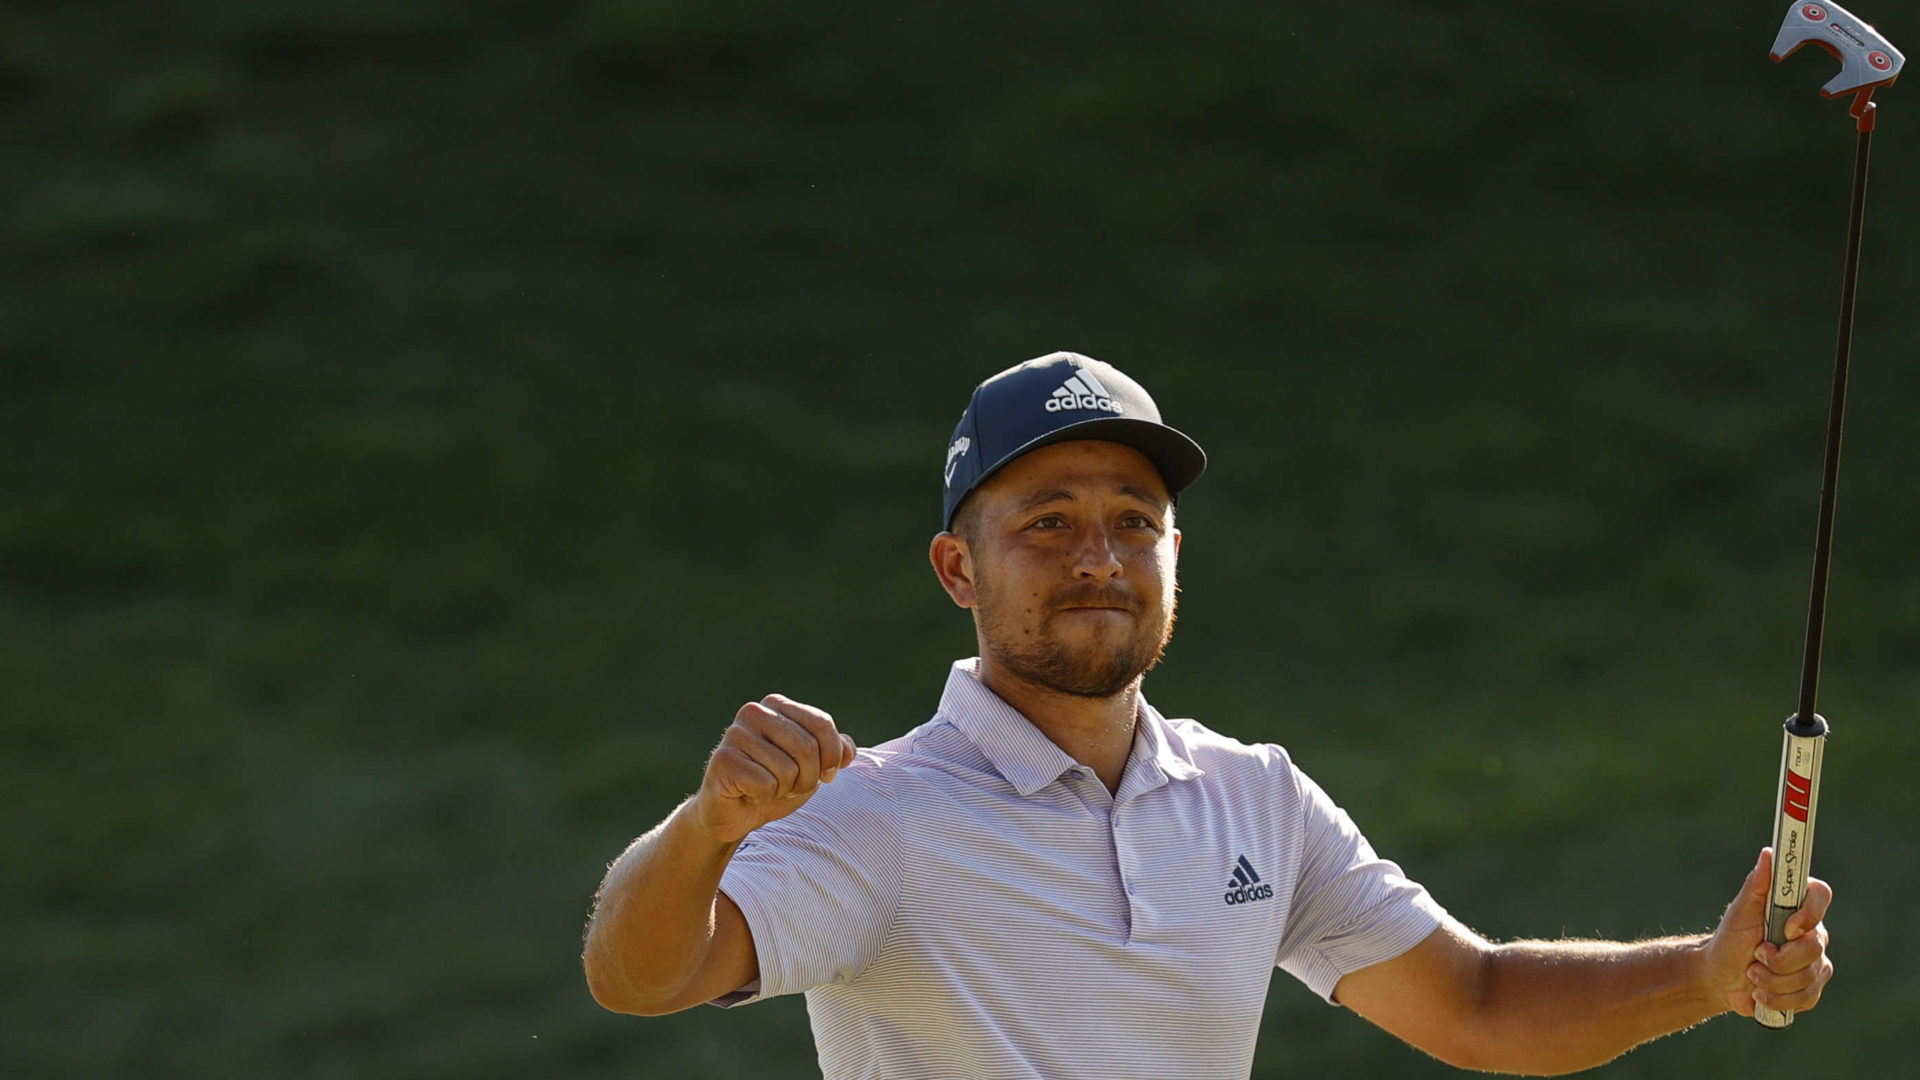 CROMWELL, CONNECTICUT - JUNE 26: Xander Schauffele of the United States reacts after putting in to win on the 18th green during the final round of Travelers Championship at TPC River Highlands on June 26, 2022 in Cromwell, Connecticut. (Photo by Tim Nwachukwu/Getty Images)